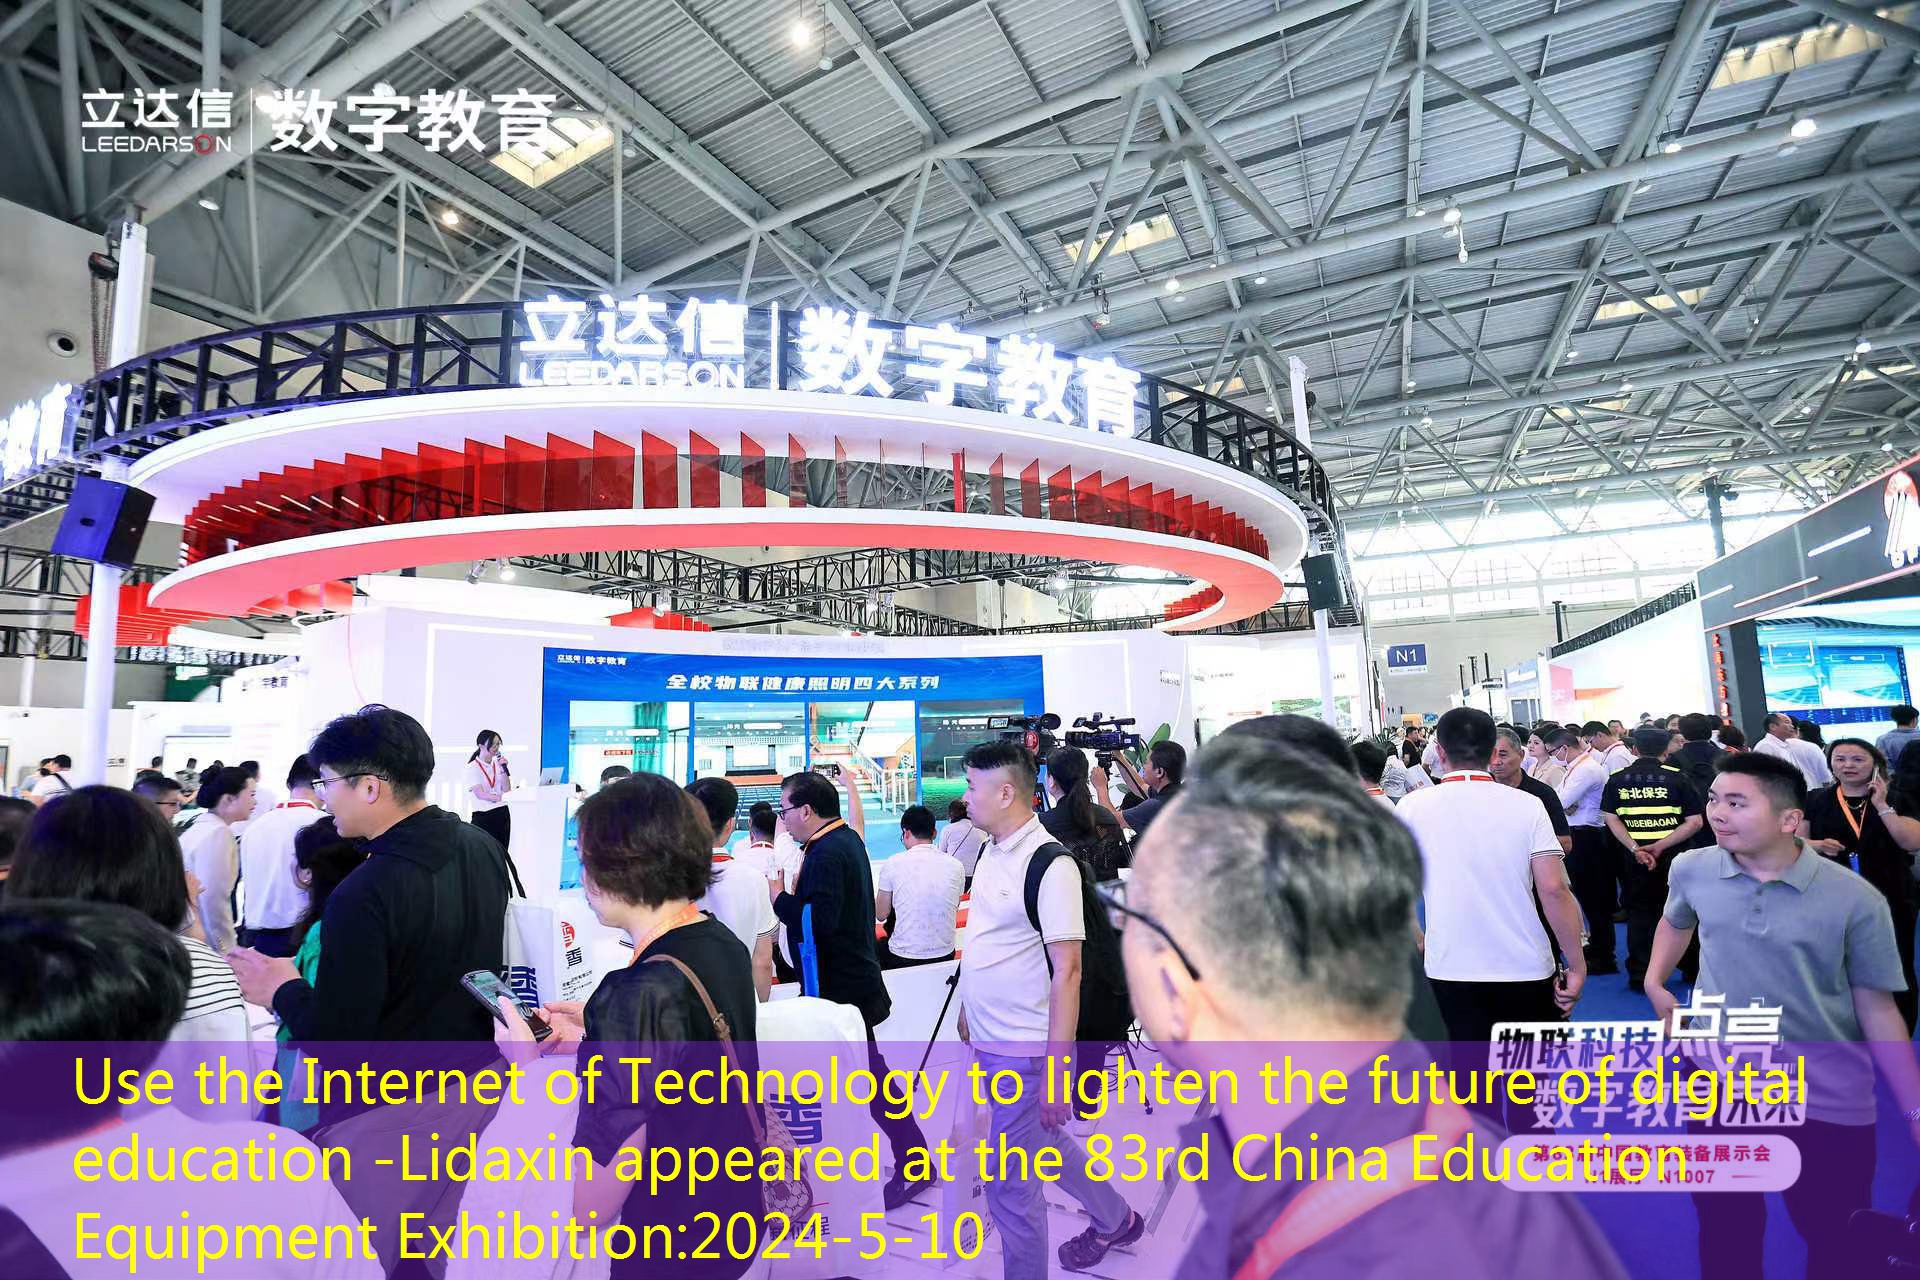 Use the Internet of Technology to lighten the future of digital education -Lidaxin appeared at the 83rd China Education Equipment Exhibition